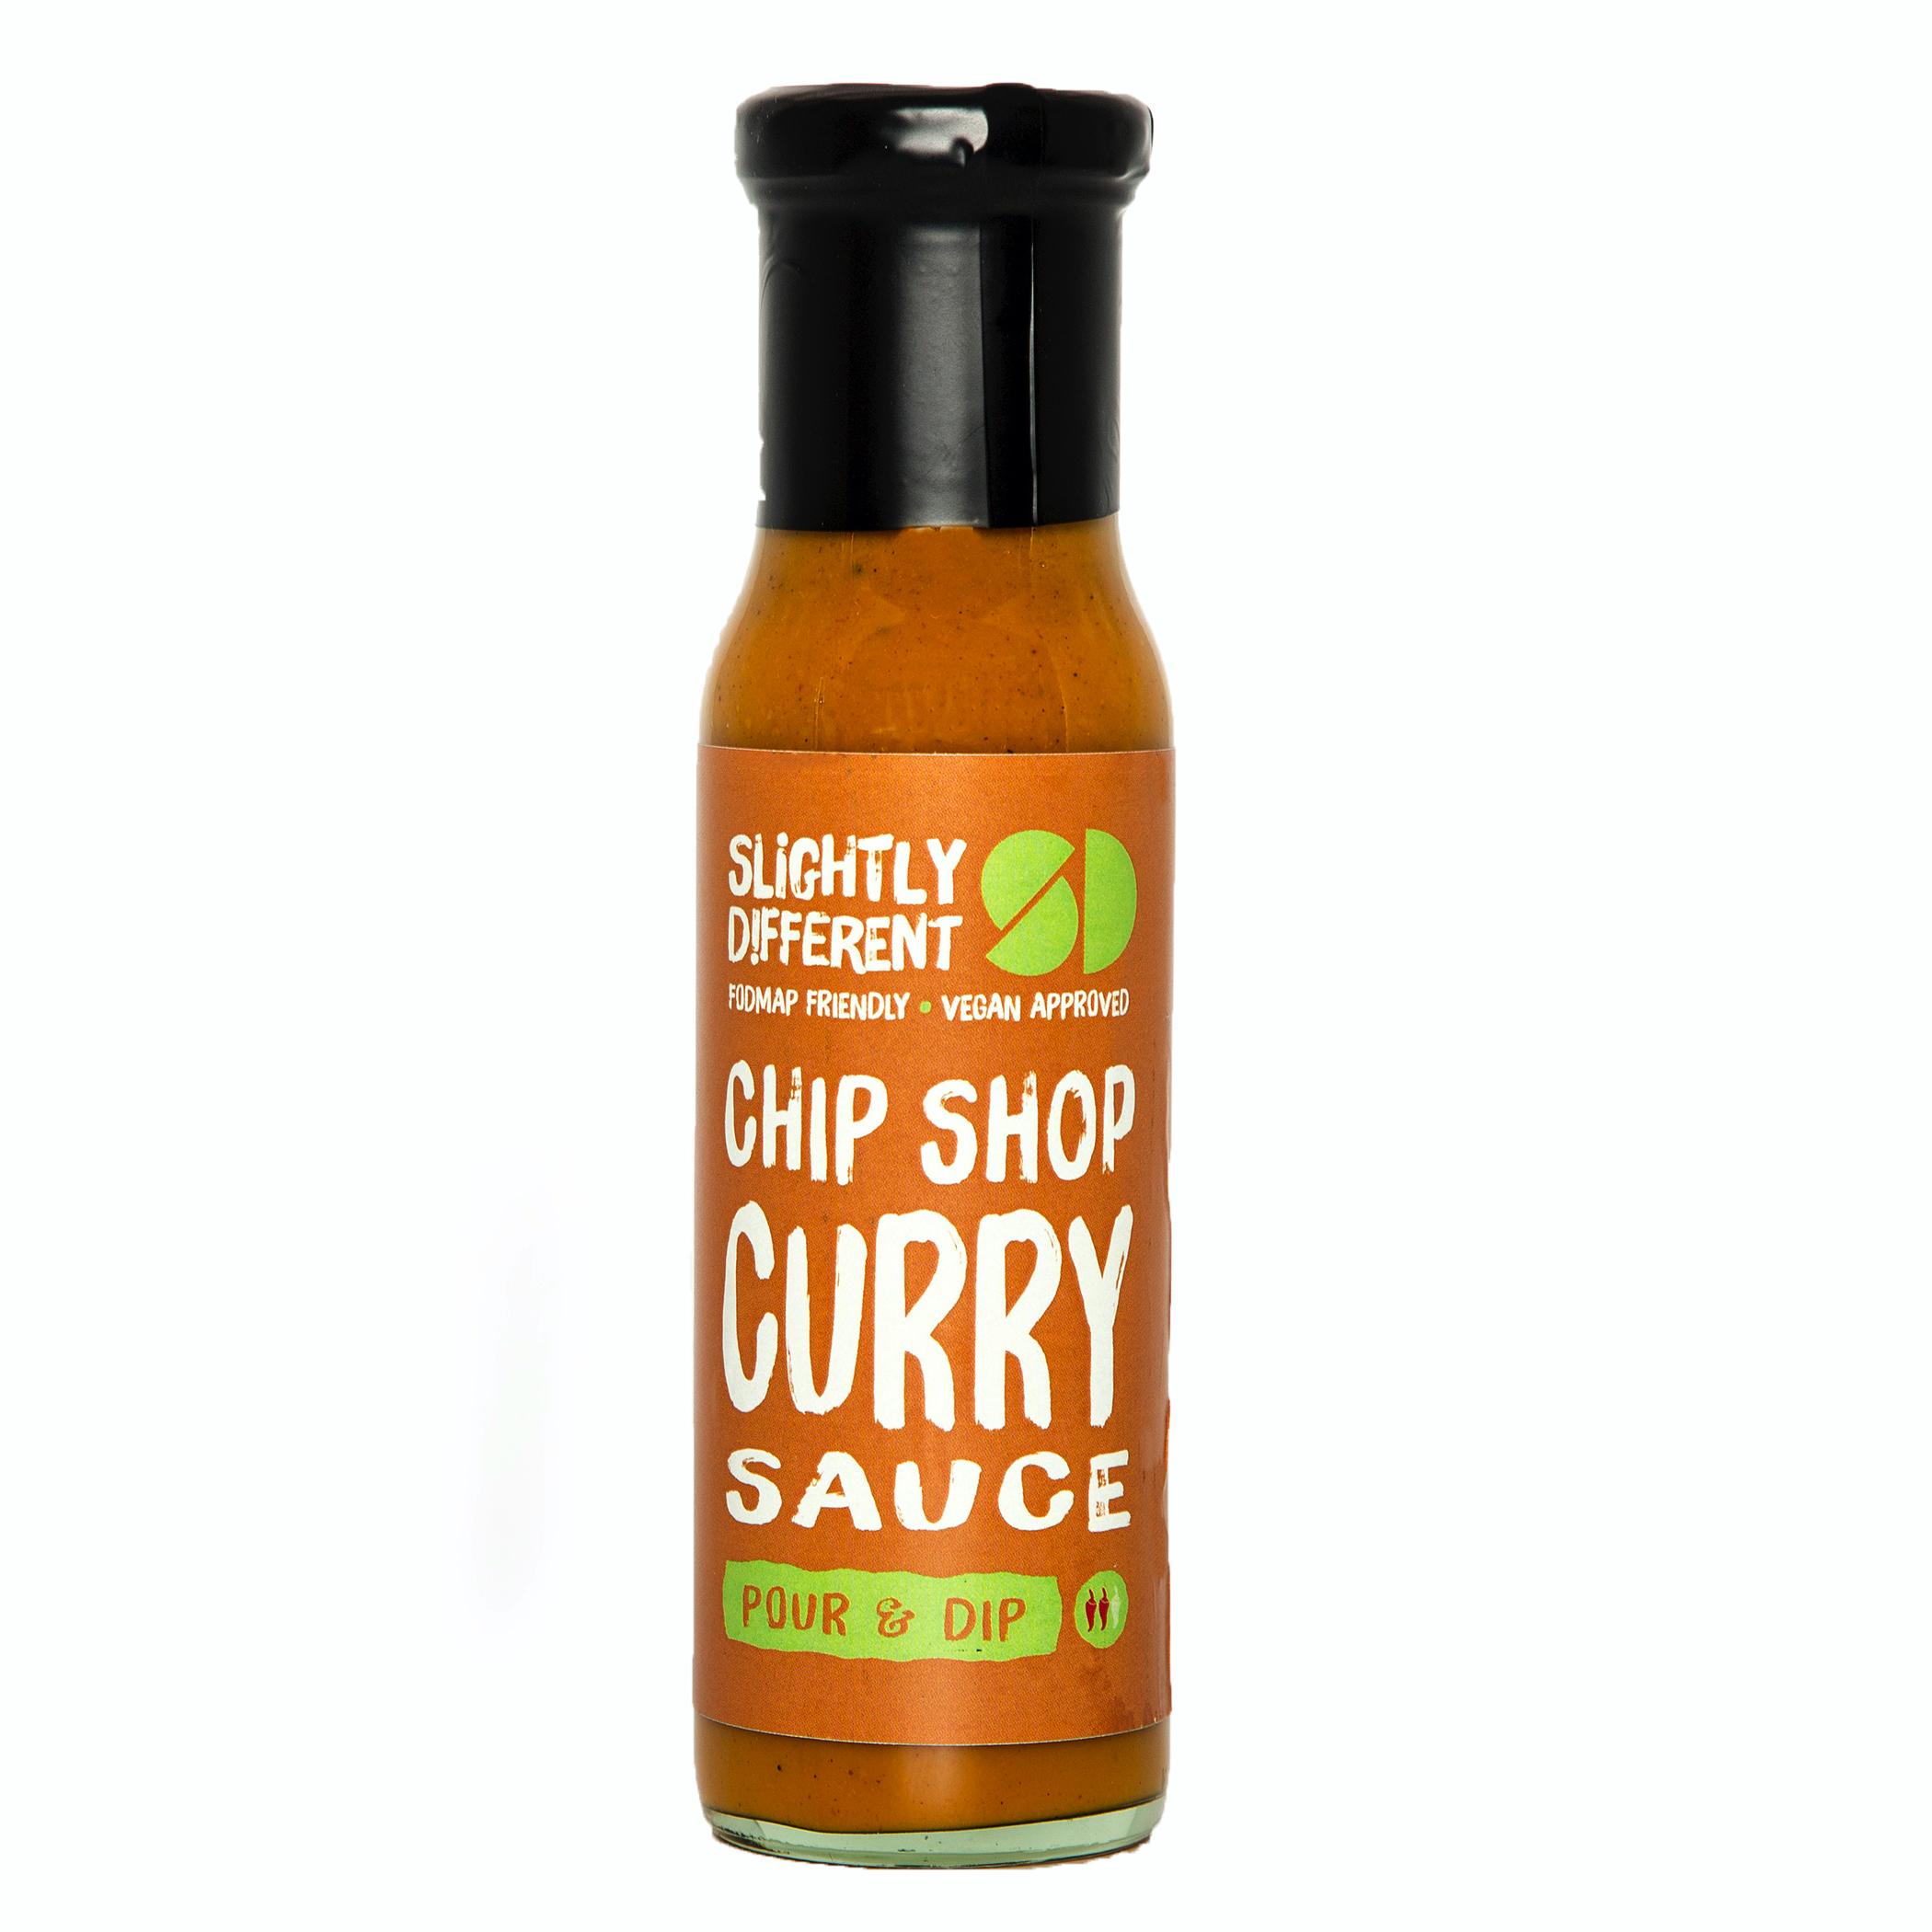 A bottle of Slightly Different's Chip Shop Curry Sauce